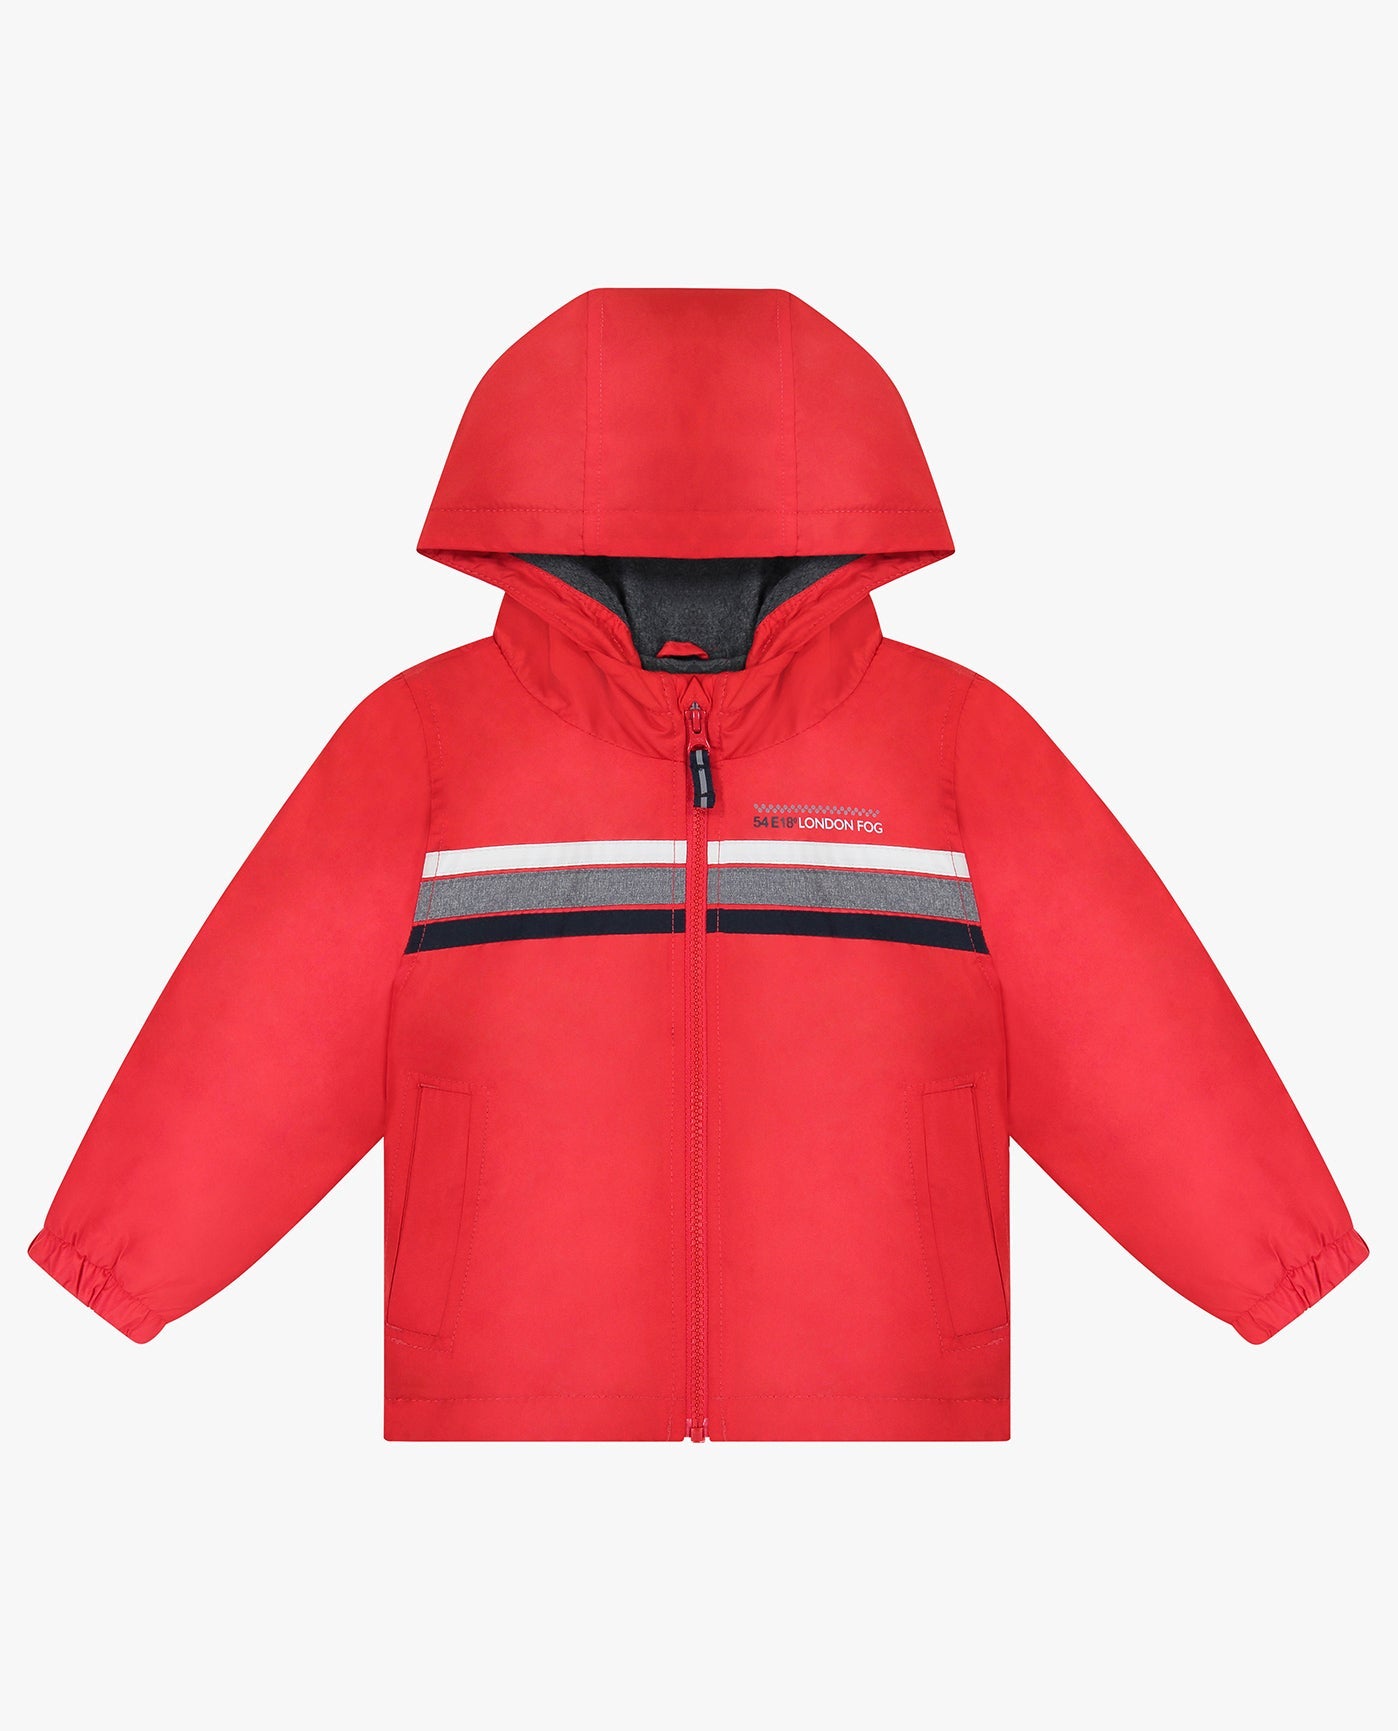 ALT VIEW OF TODDLER BOYS ZIP FRONT HOODED SPORTY STRIPE RAINCOAT | RED